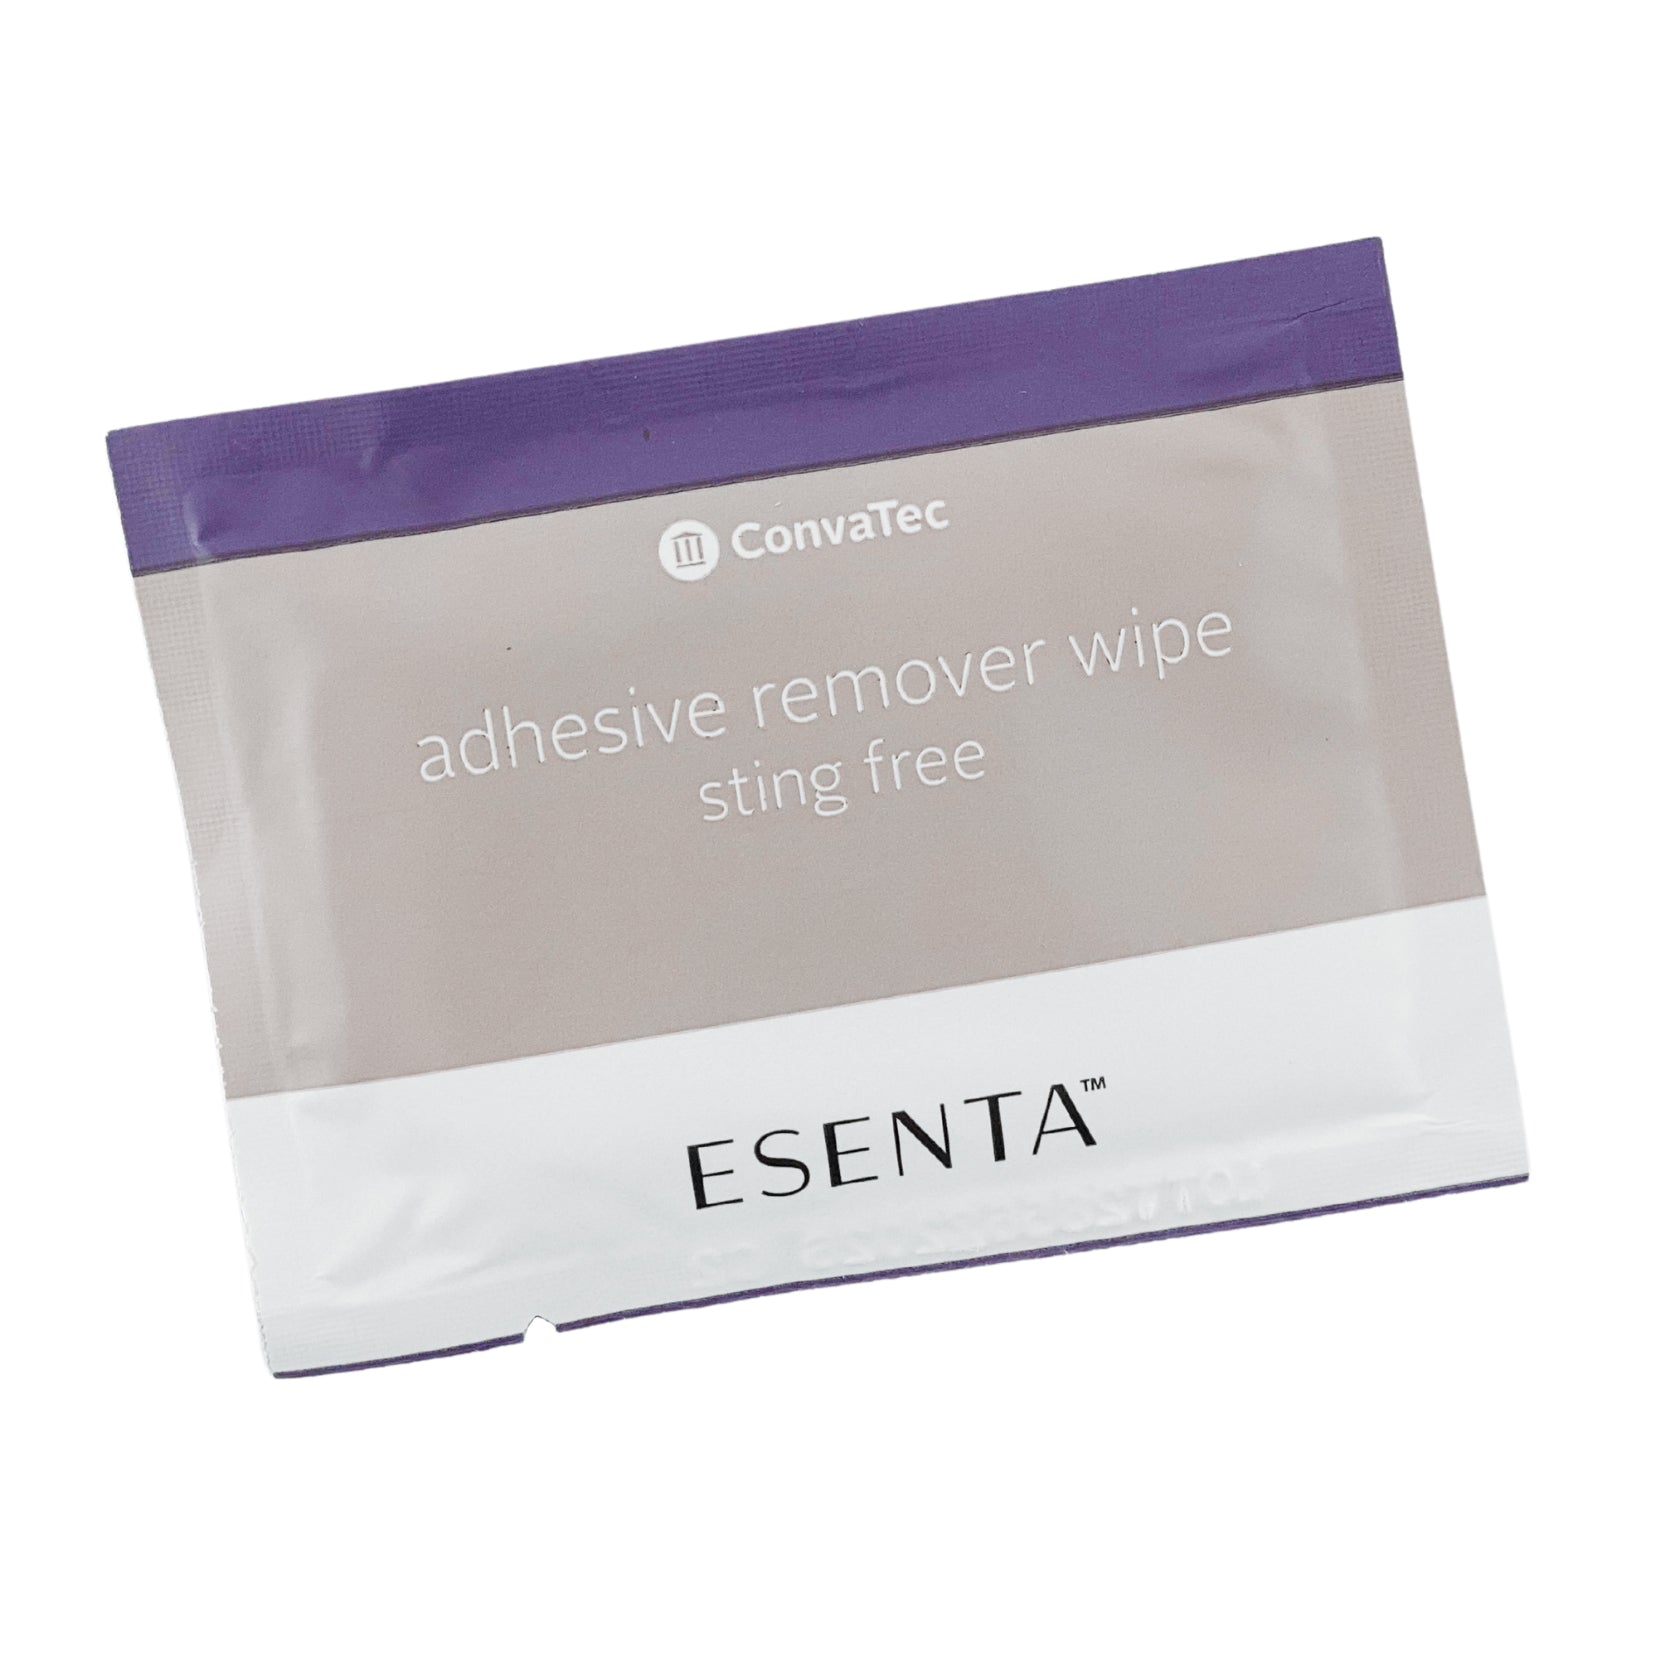 ESENTA Sting-Free Adhesive Remover Wipes - Personally Delivered